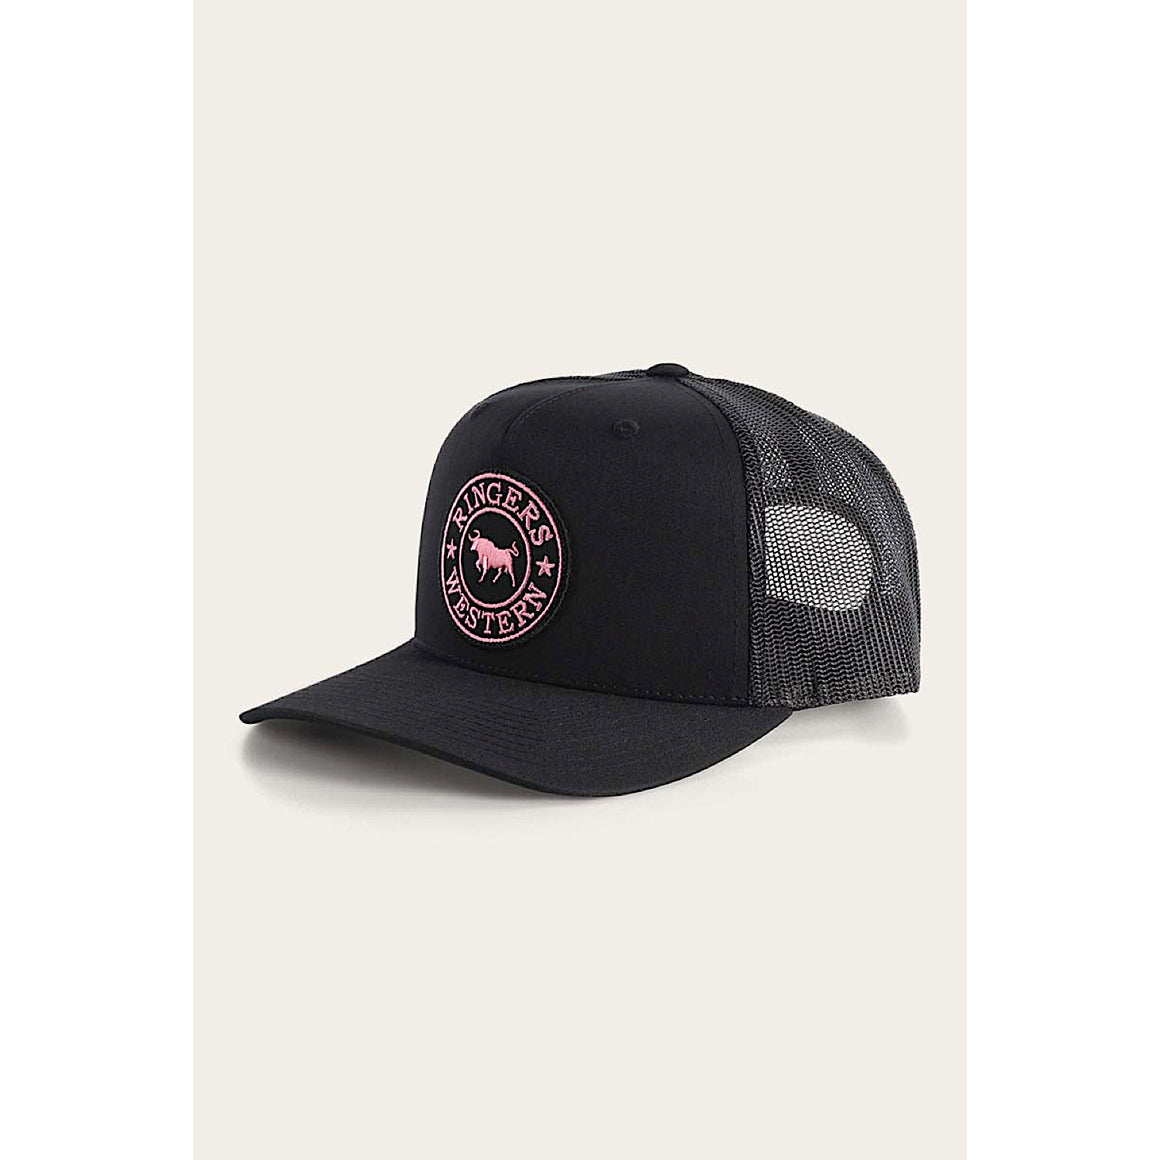 Ringers Western Signature Bull Trucker Cap - Black with Black & Pink Patch